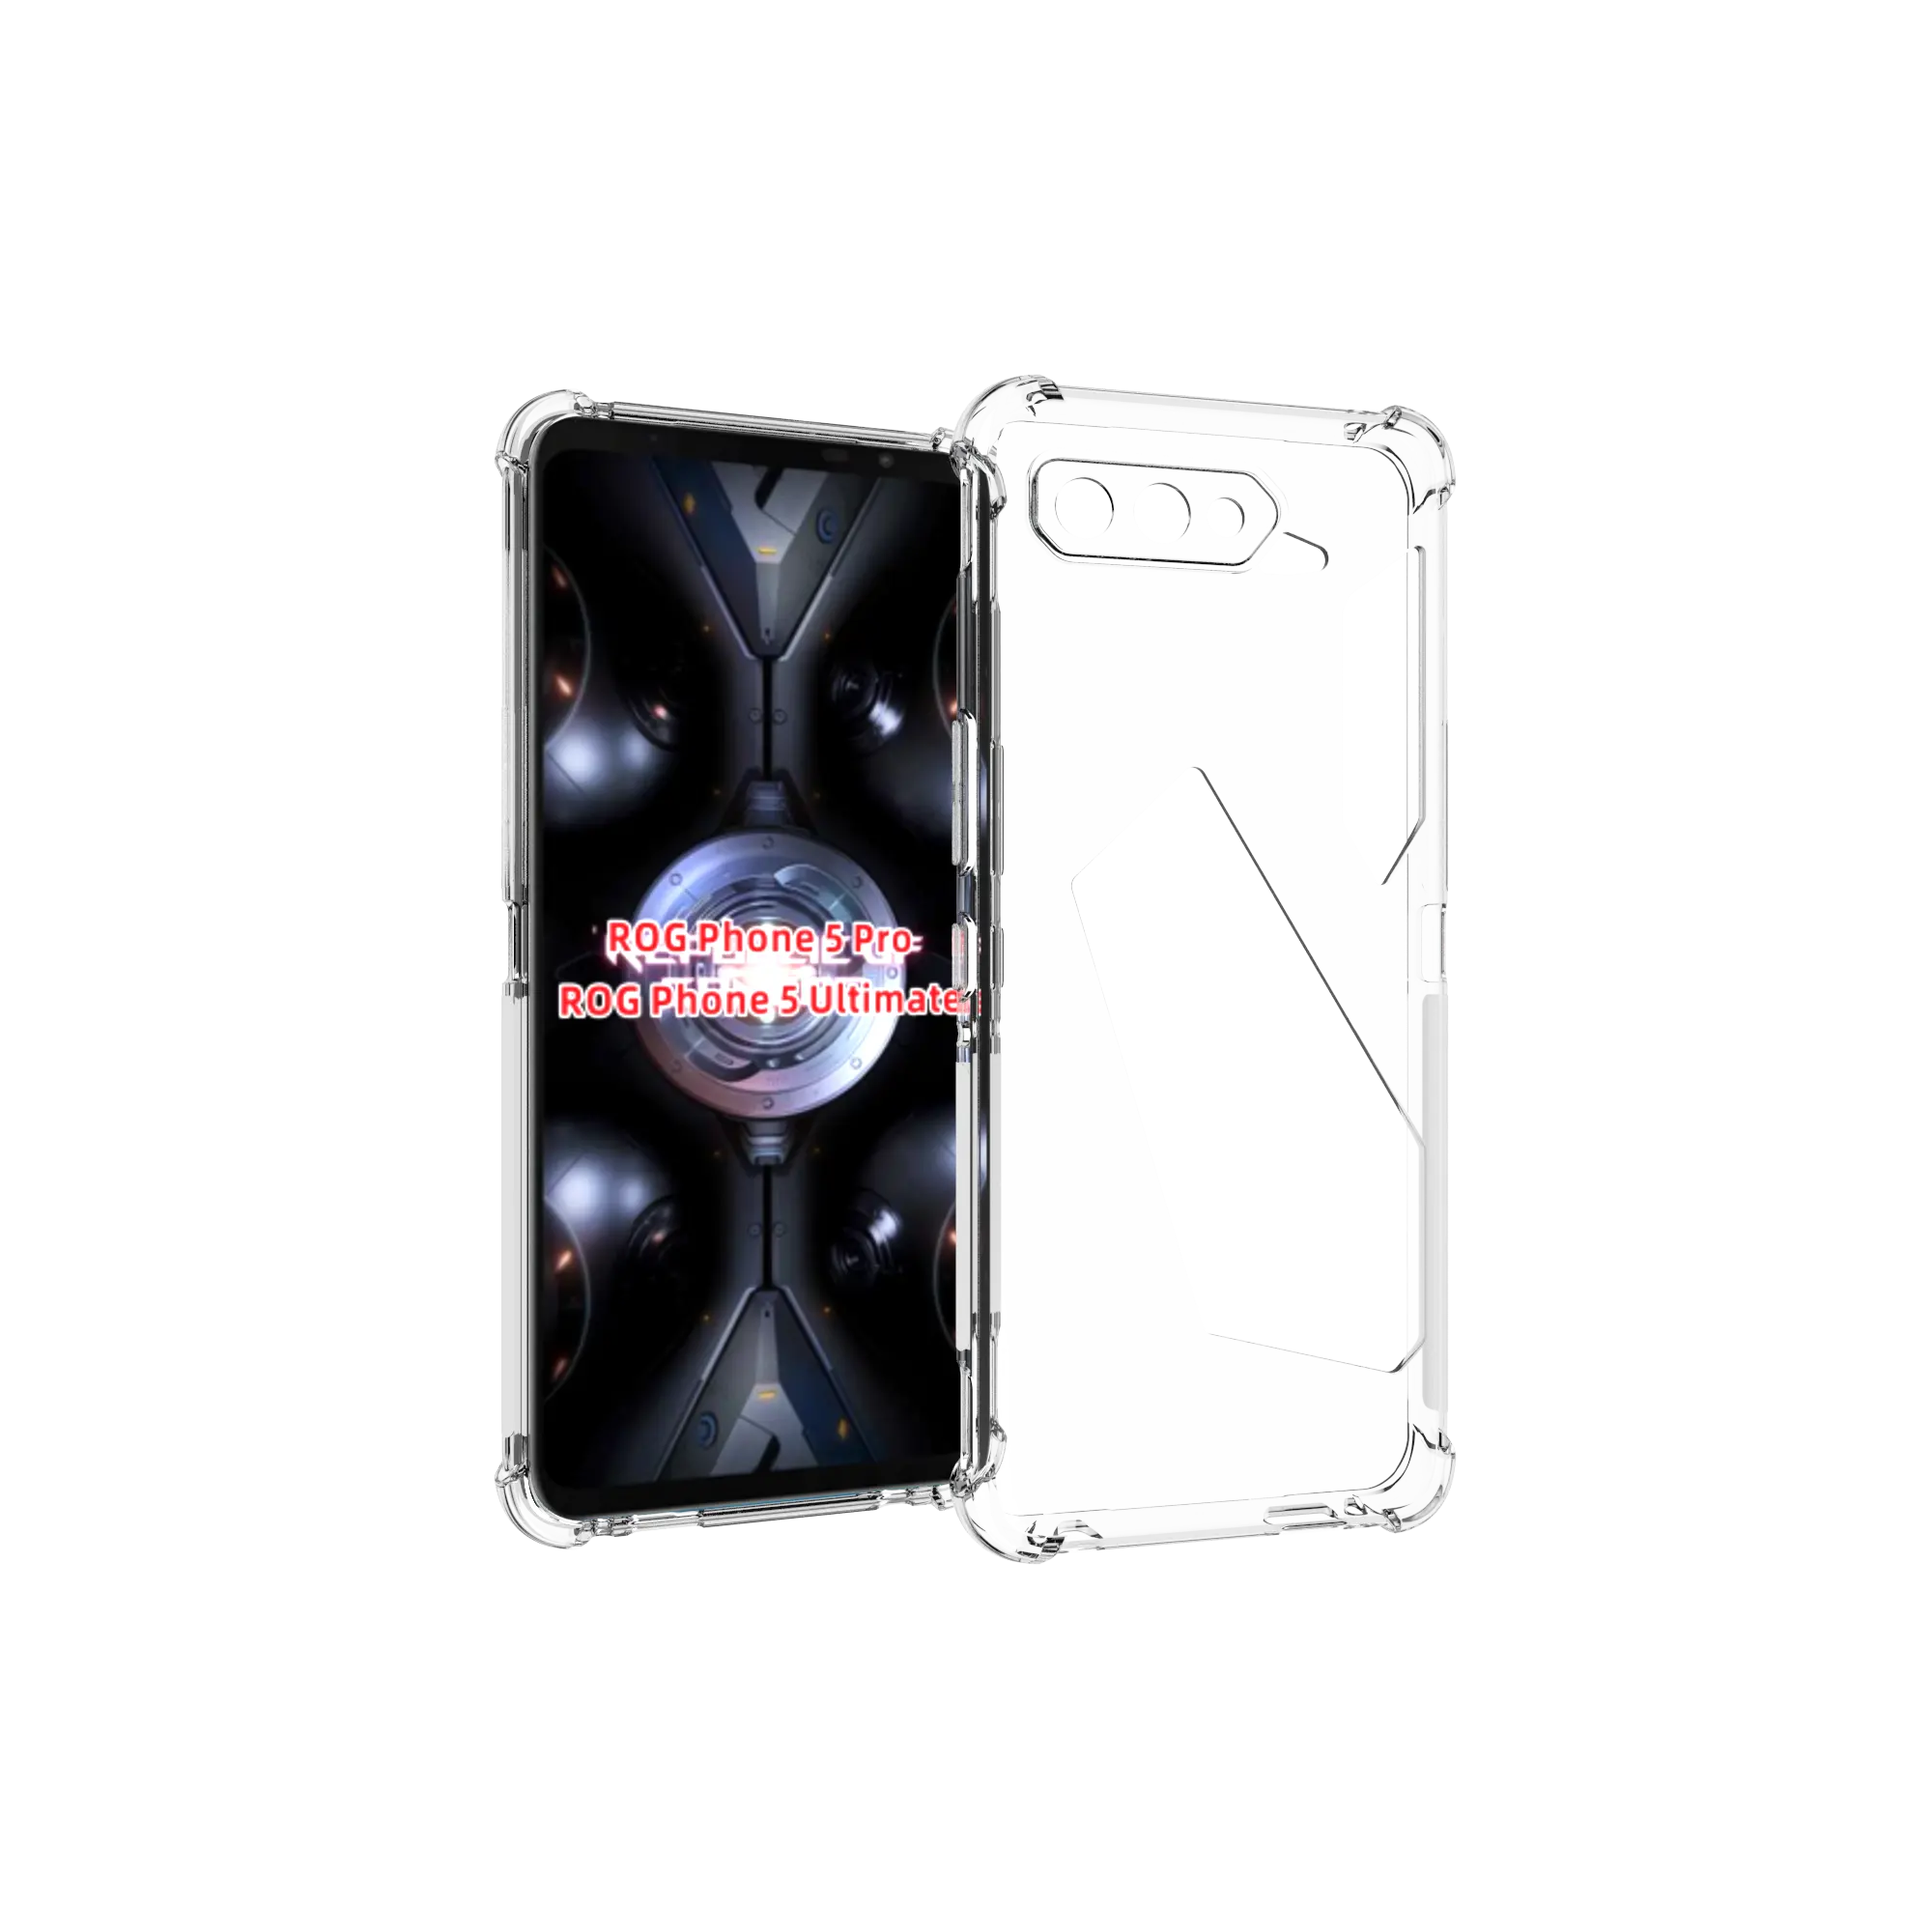 Clear Shockproof 360 Matte Bumper Slim TPU Cover Case For Asus ROG Phone 5 Ultimate